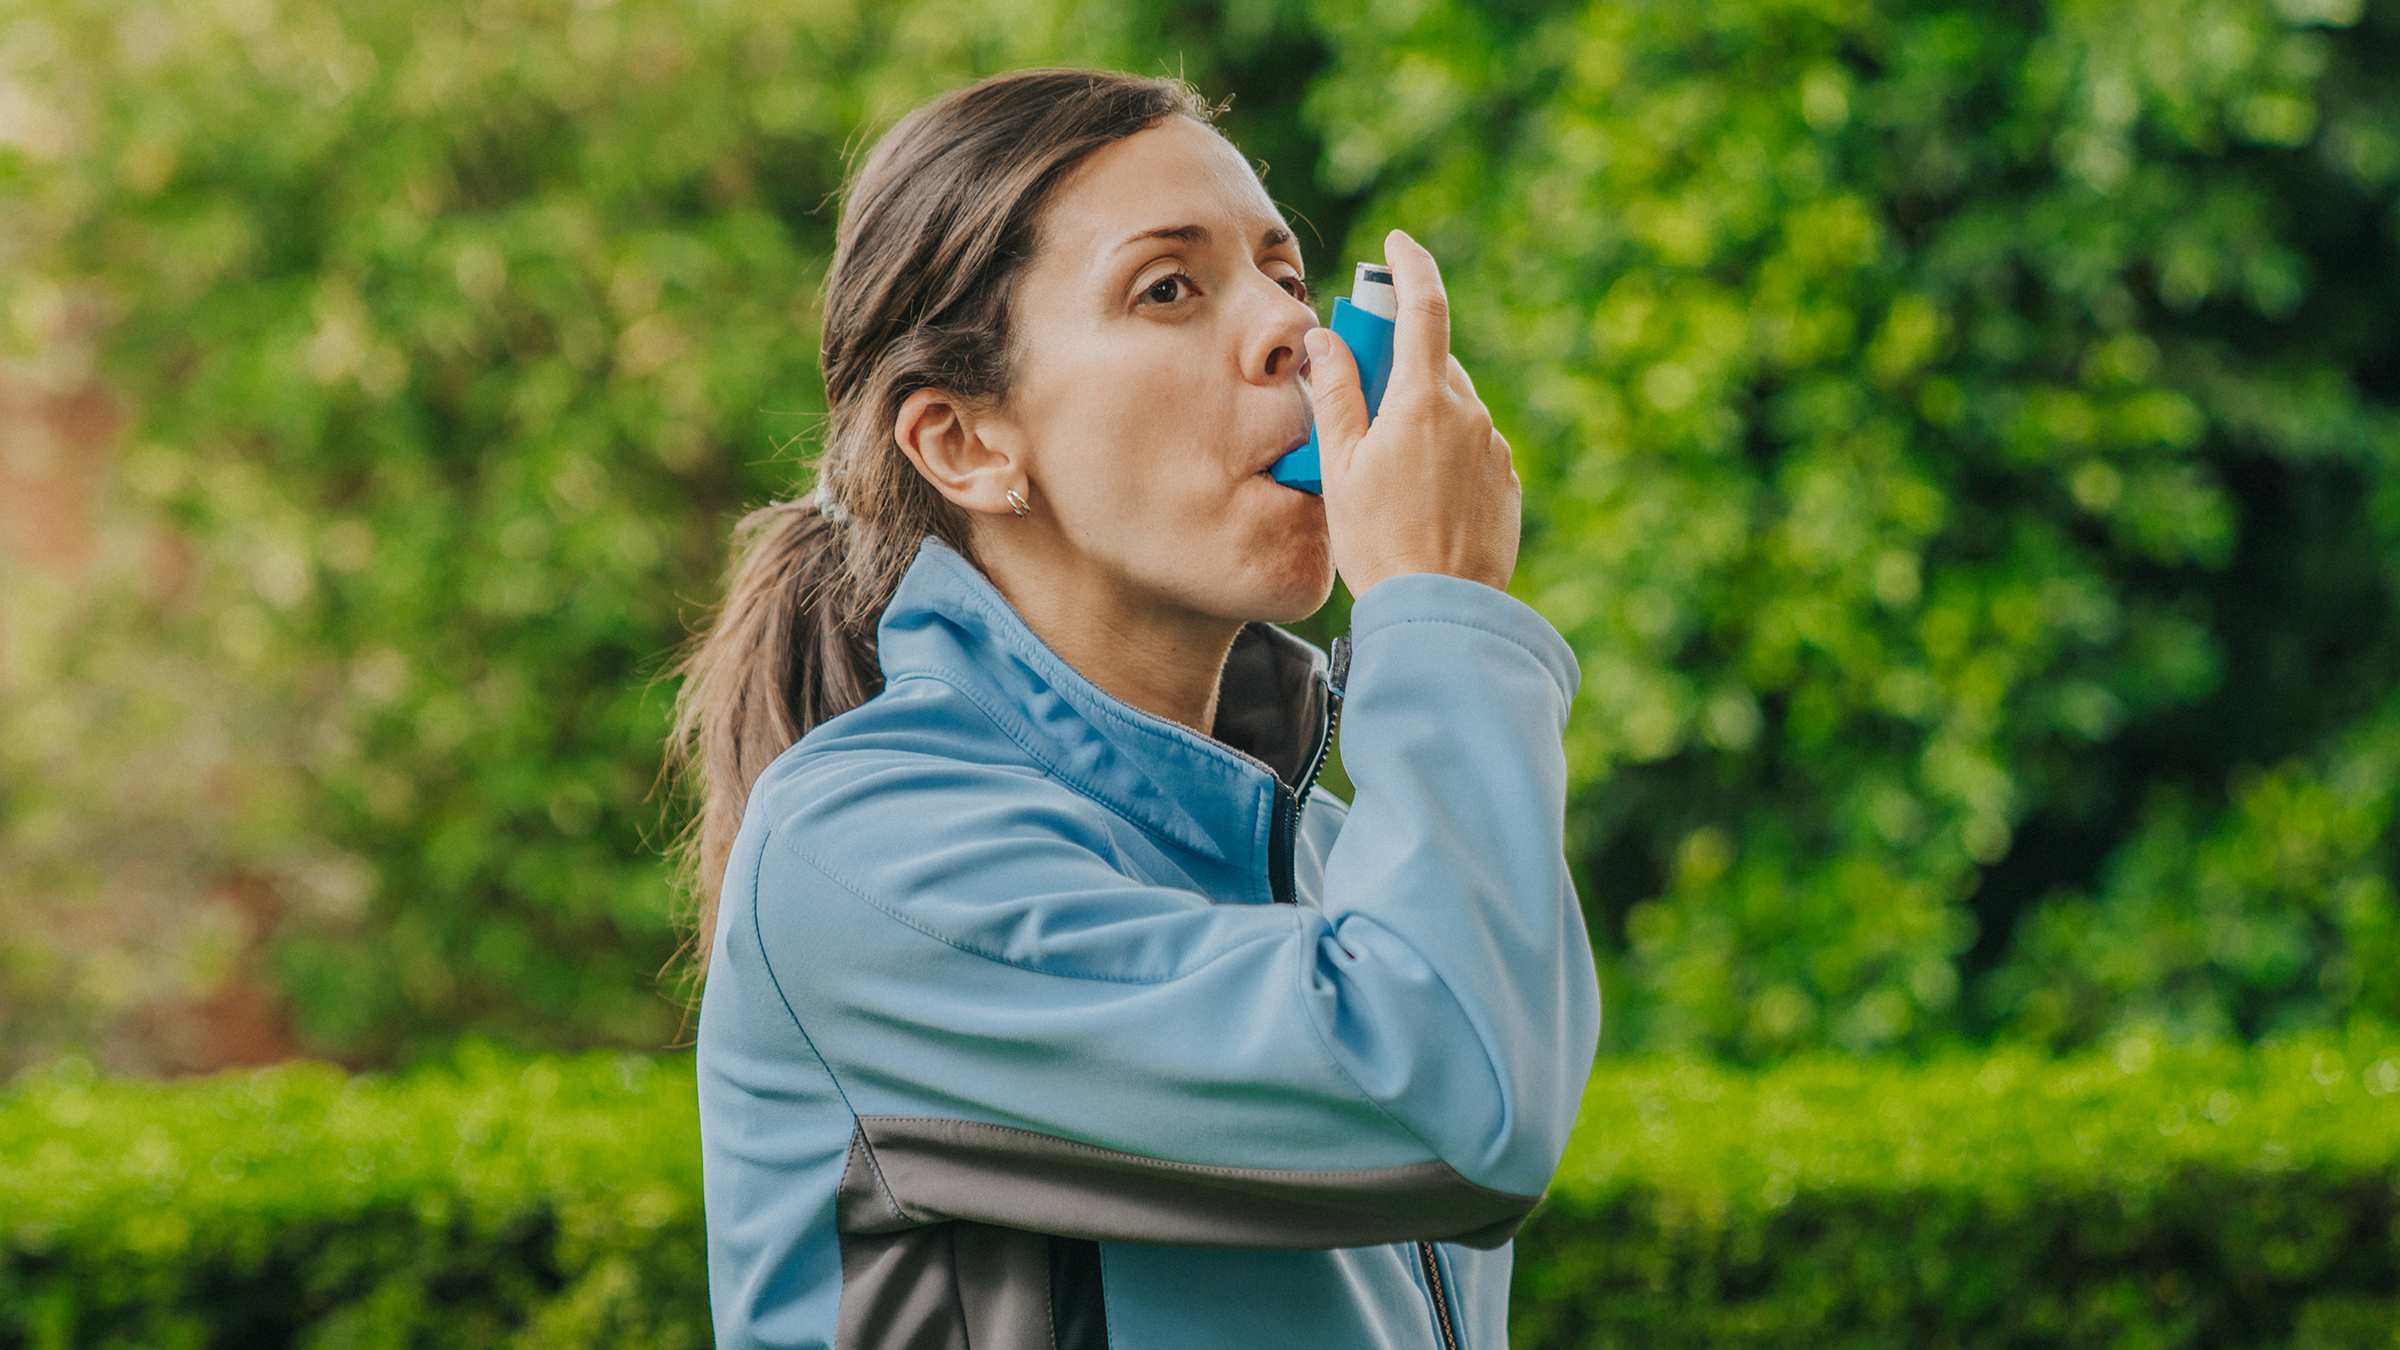 12 Best Steam Inhalers In 2023 For Relief From Congestion, Experts-approved